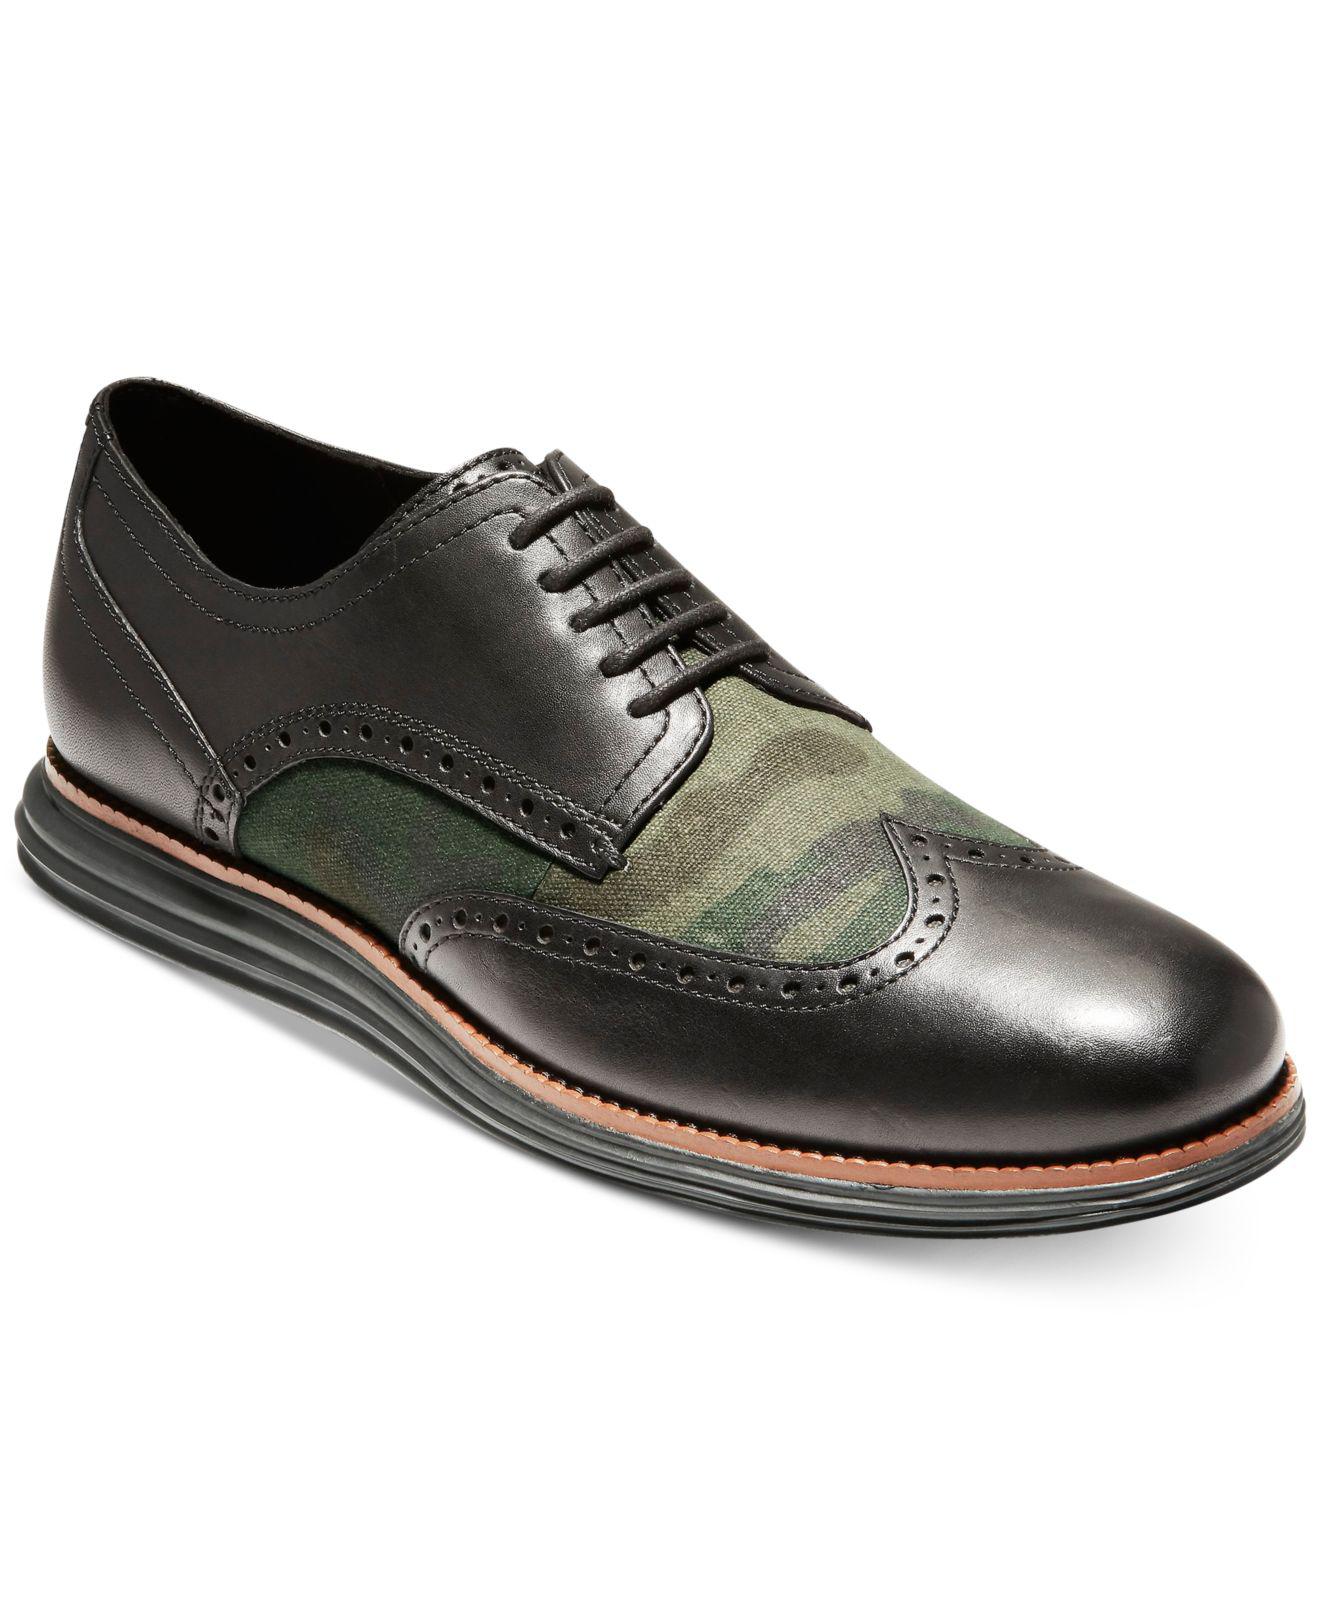 cole haan grand shortwing oxford